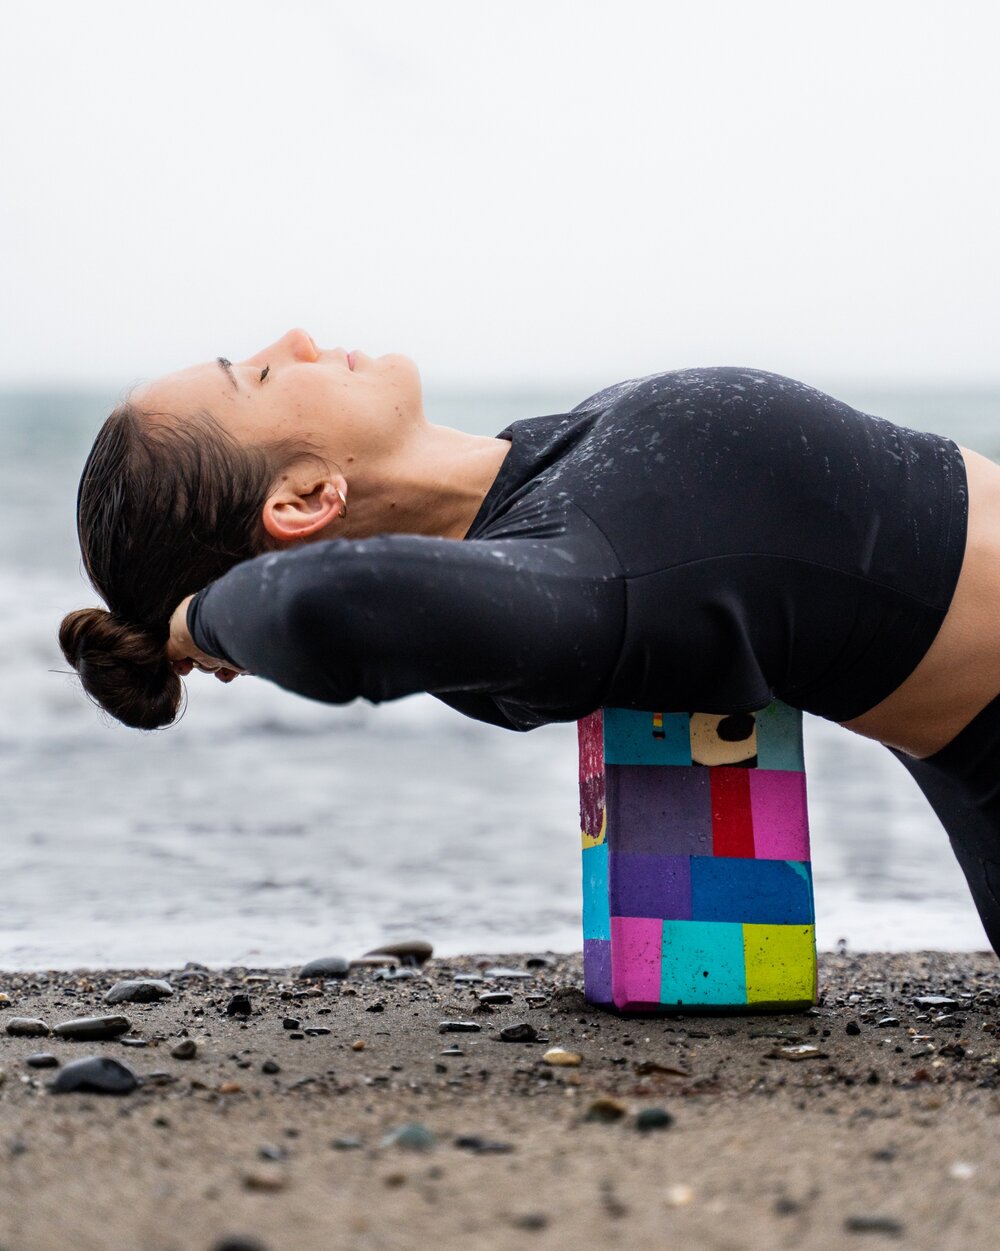 Someone practicing yoga on the Flowstate x Oceansole Yoga Block on a beach